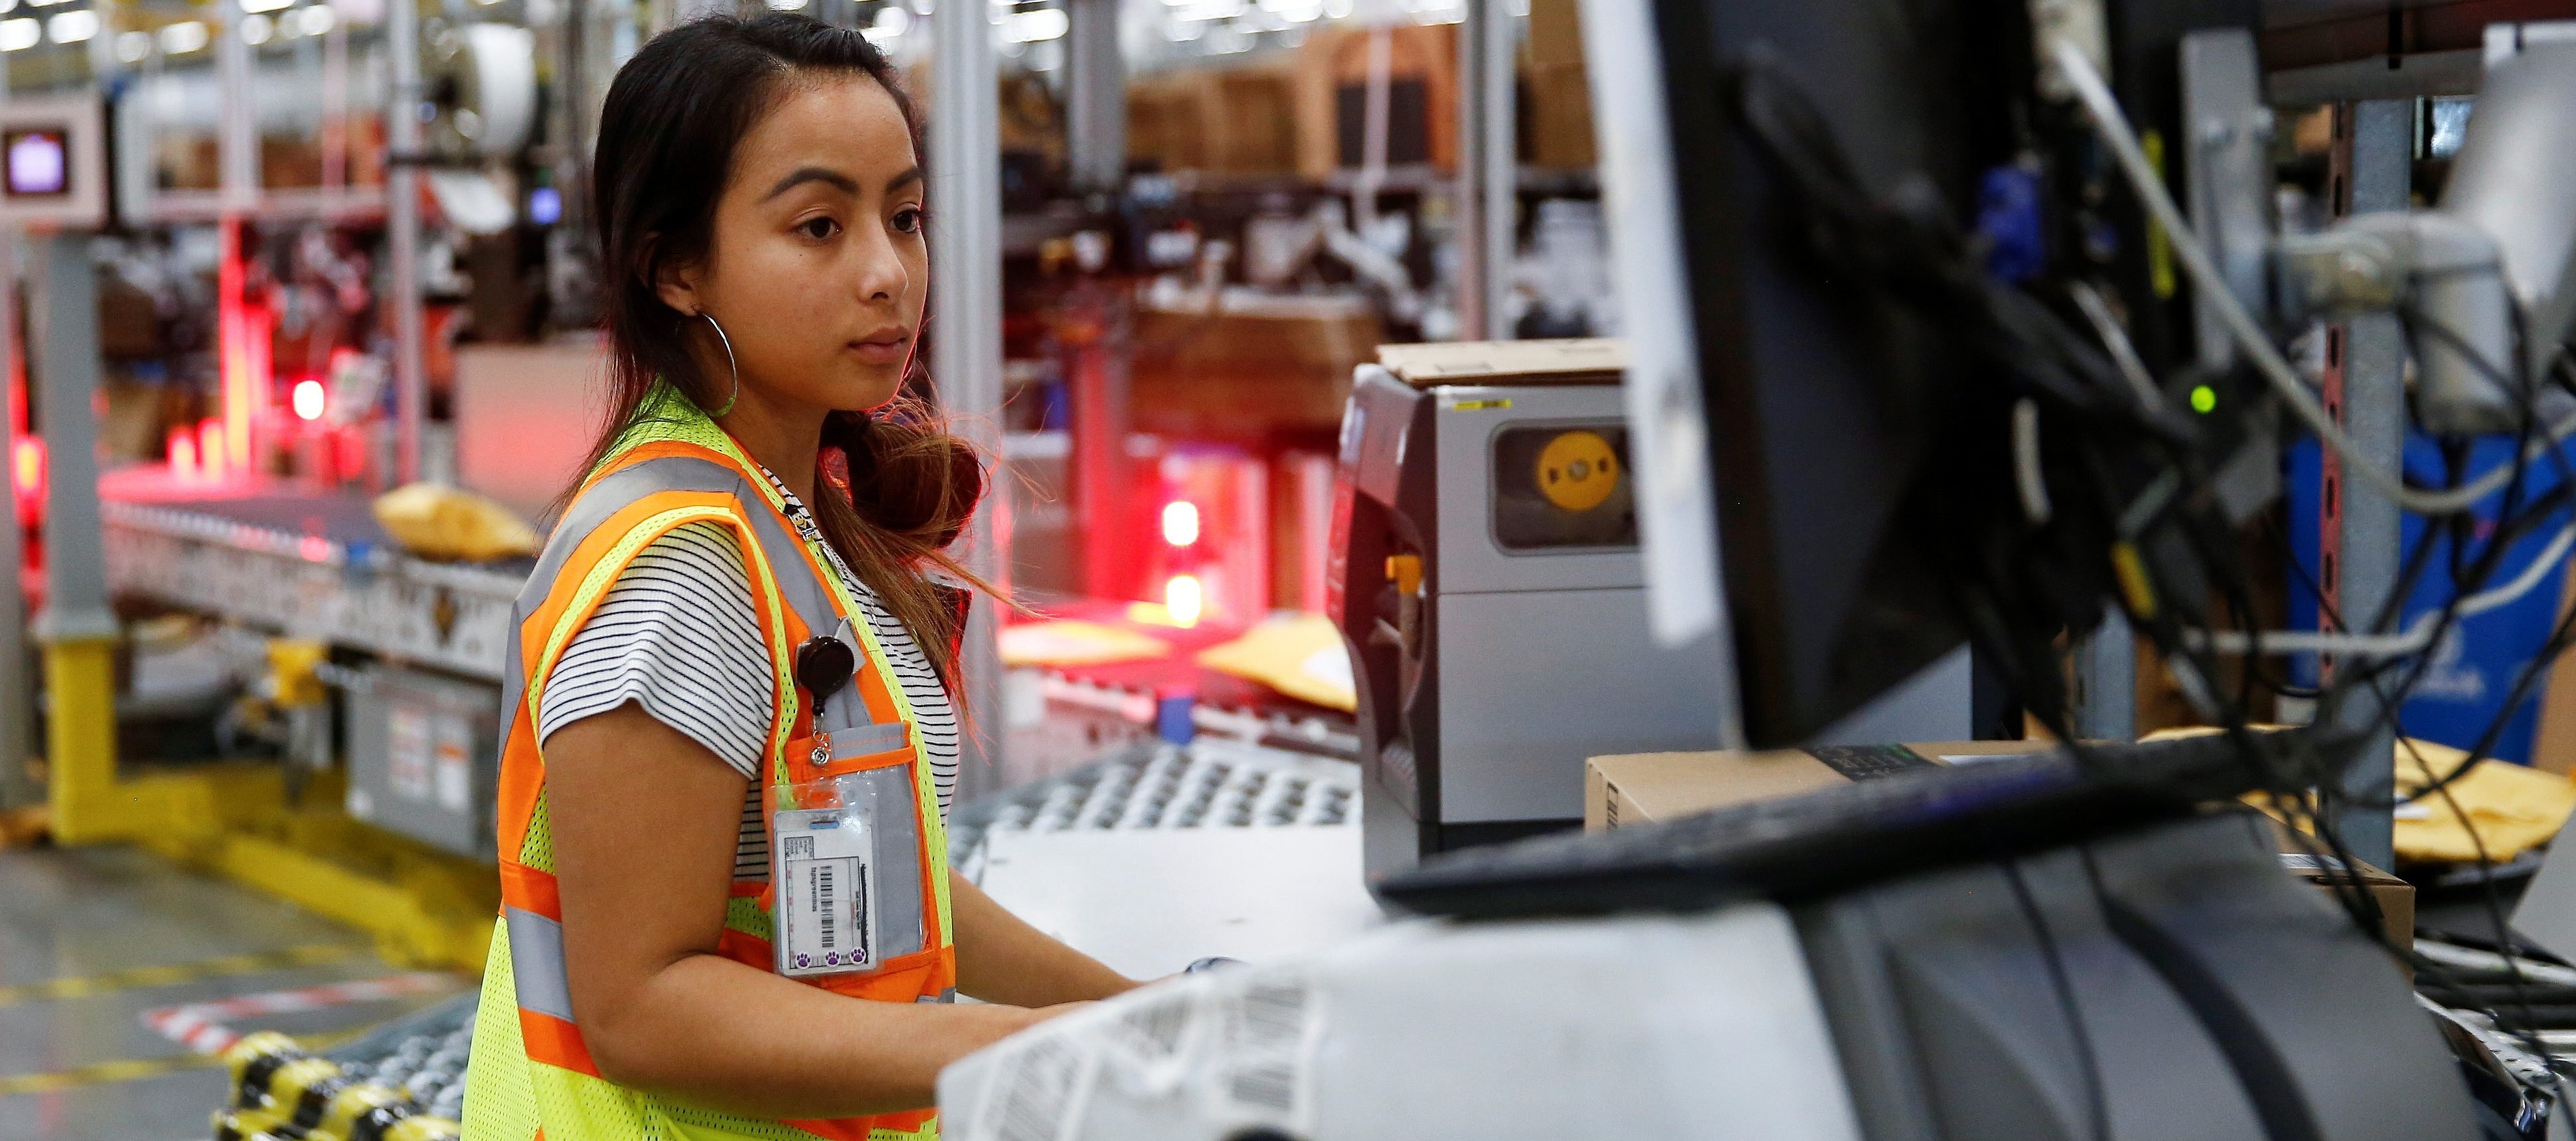 Amazon employee works on processing packages in Kent, Washington DC, REUTERS, 